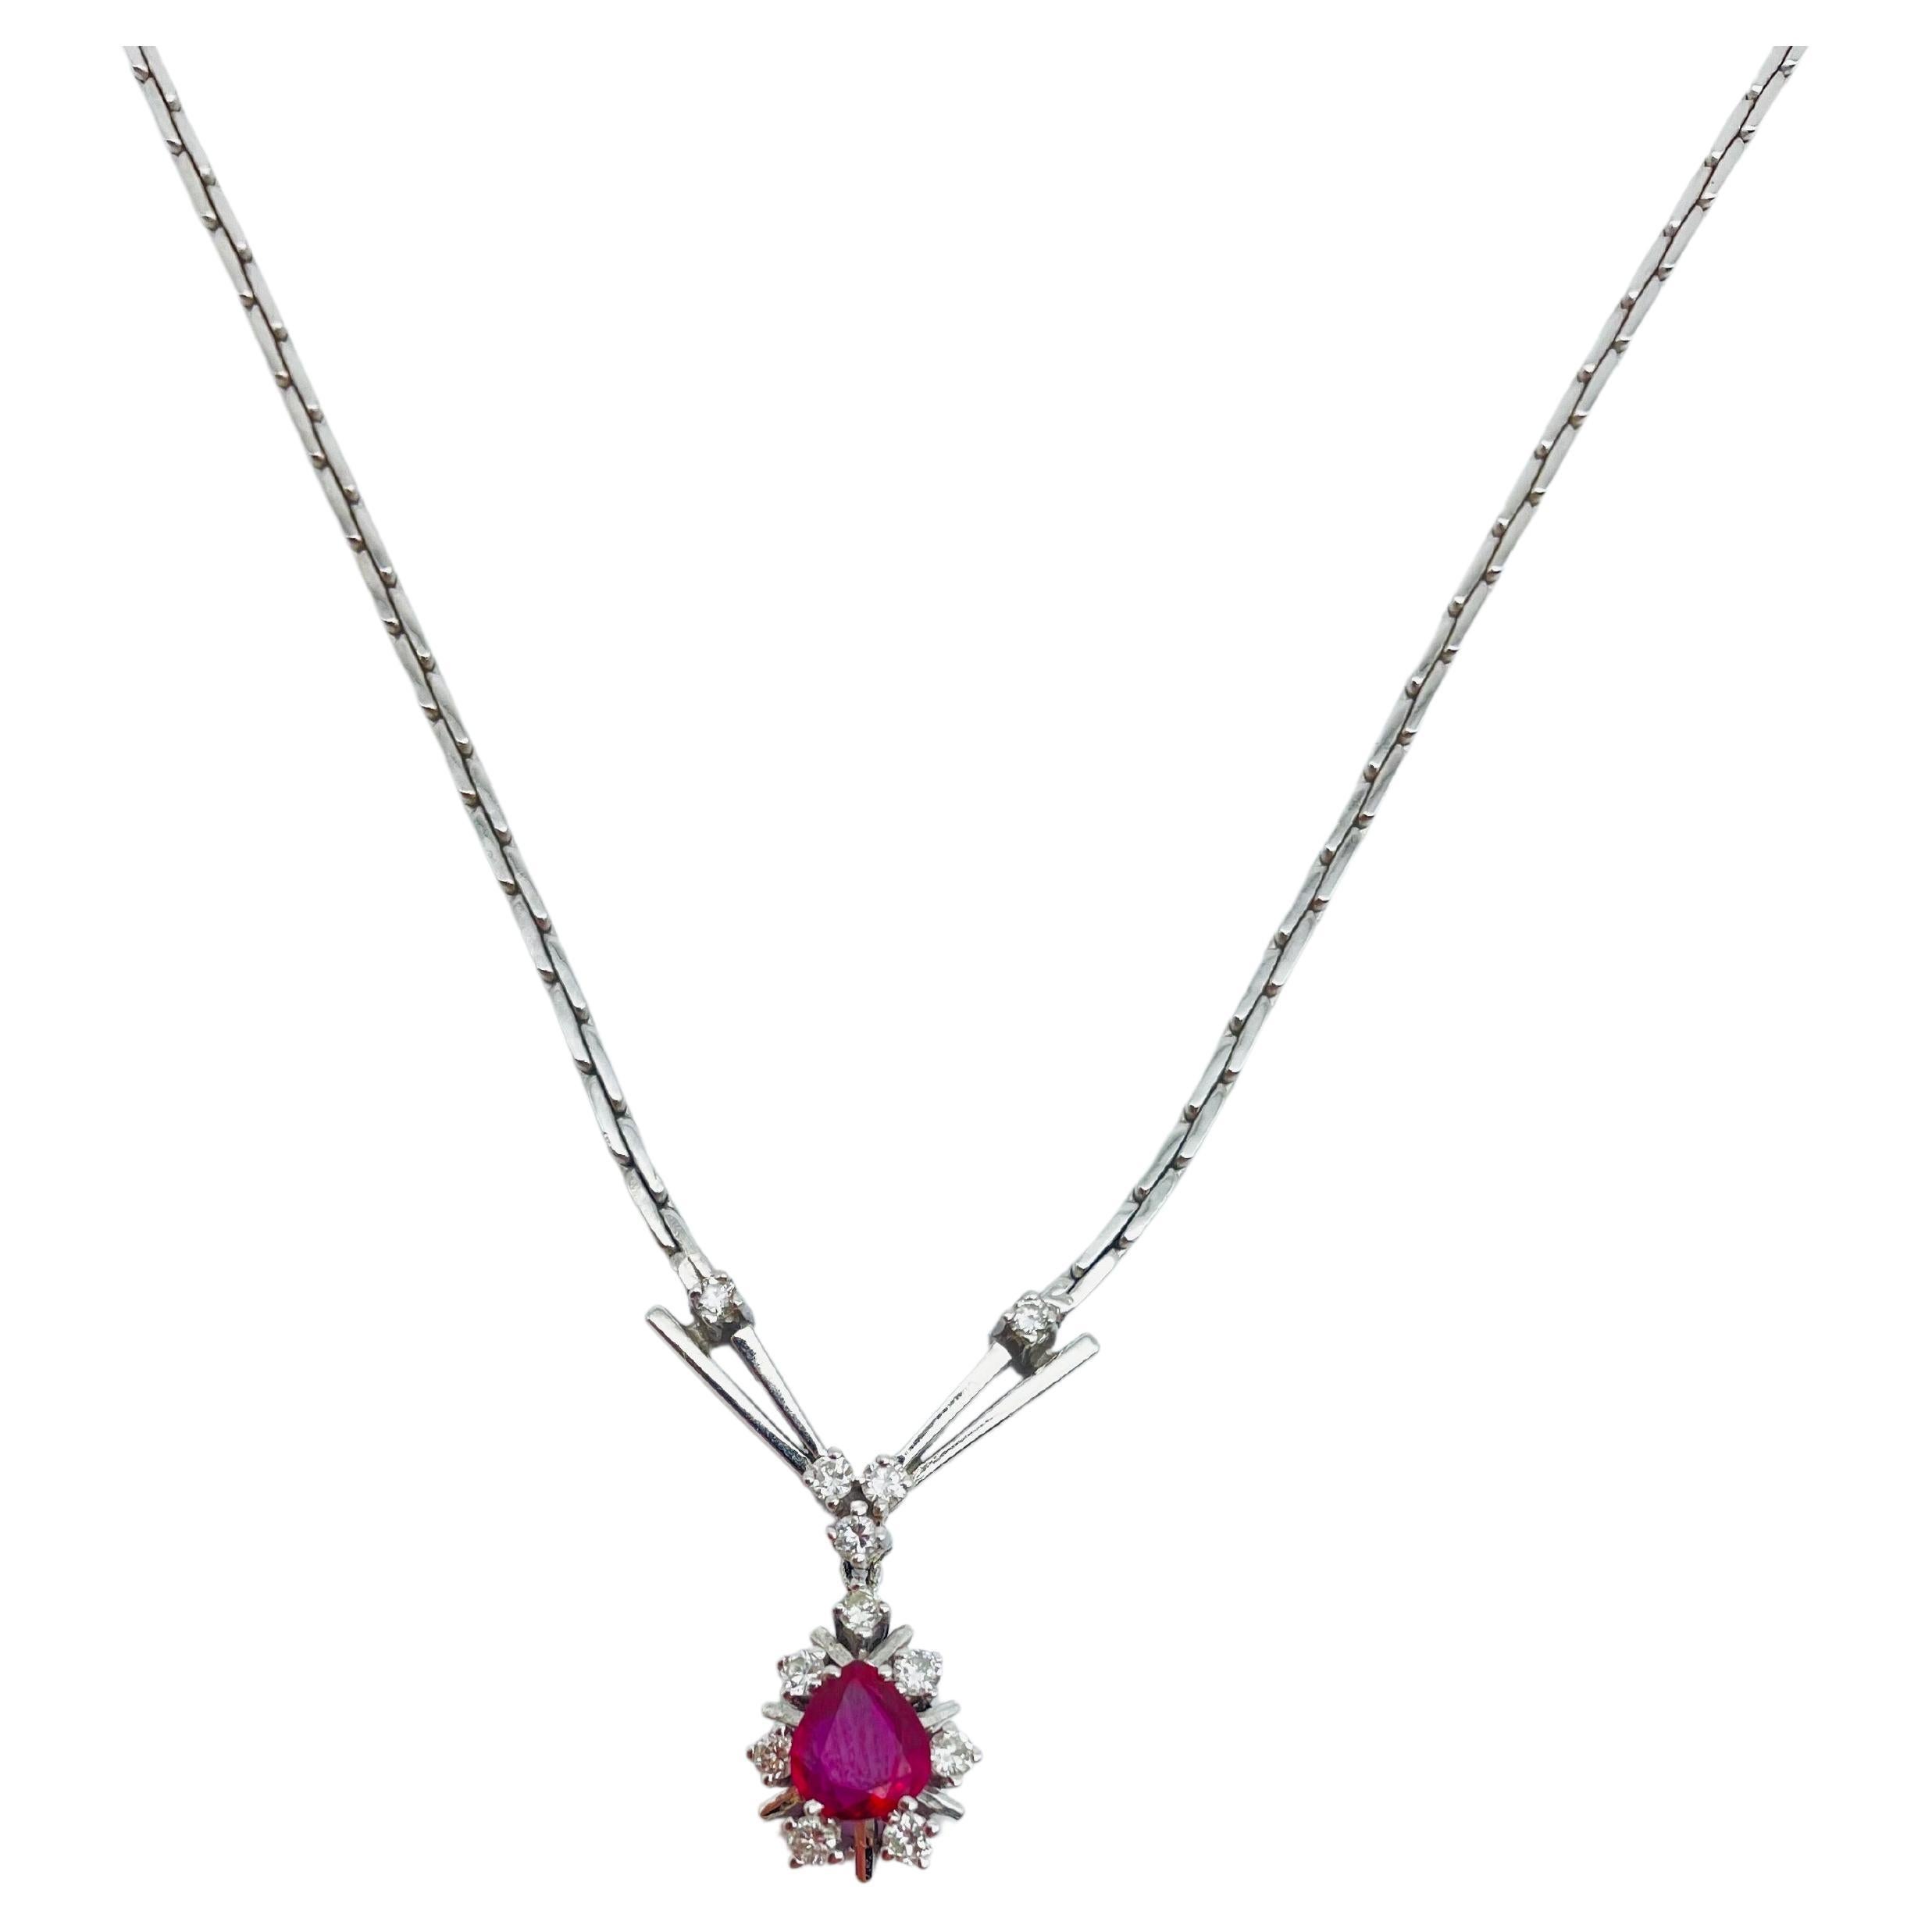 14k Brilliant '0.3 Carat' White Gold Necklace with Red Colored Stone